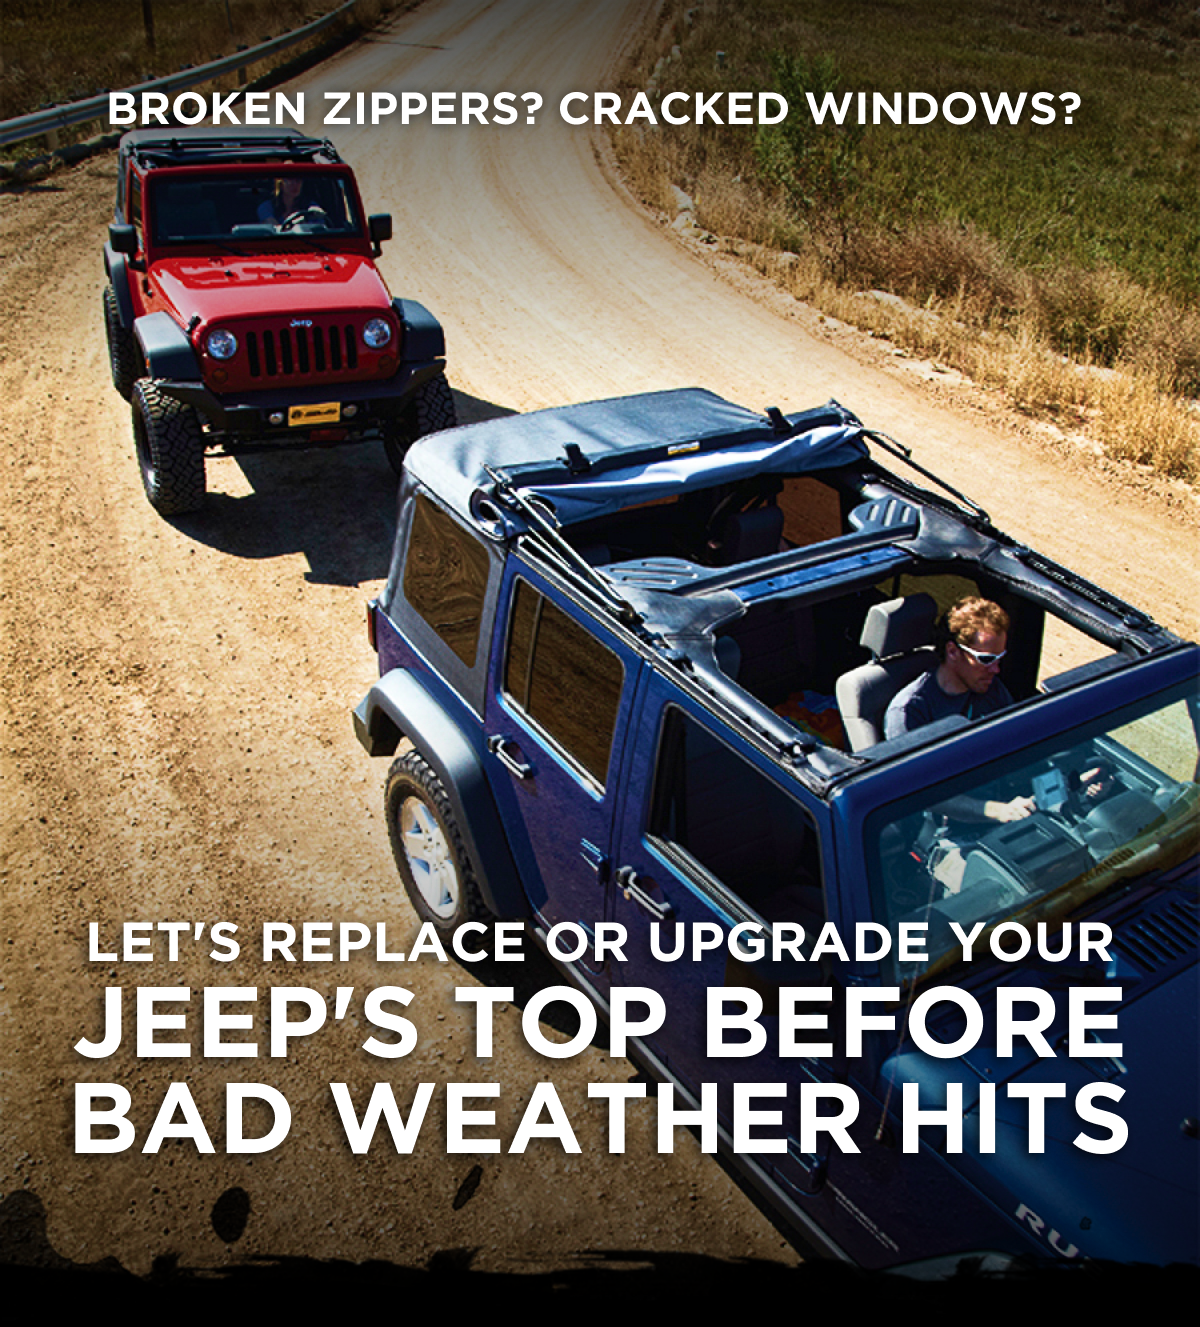 Broken Zippers? Cracked Windows? Let's Replace Or Upgrade Your Jeep's Top Before Bad Weather Hits